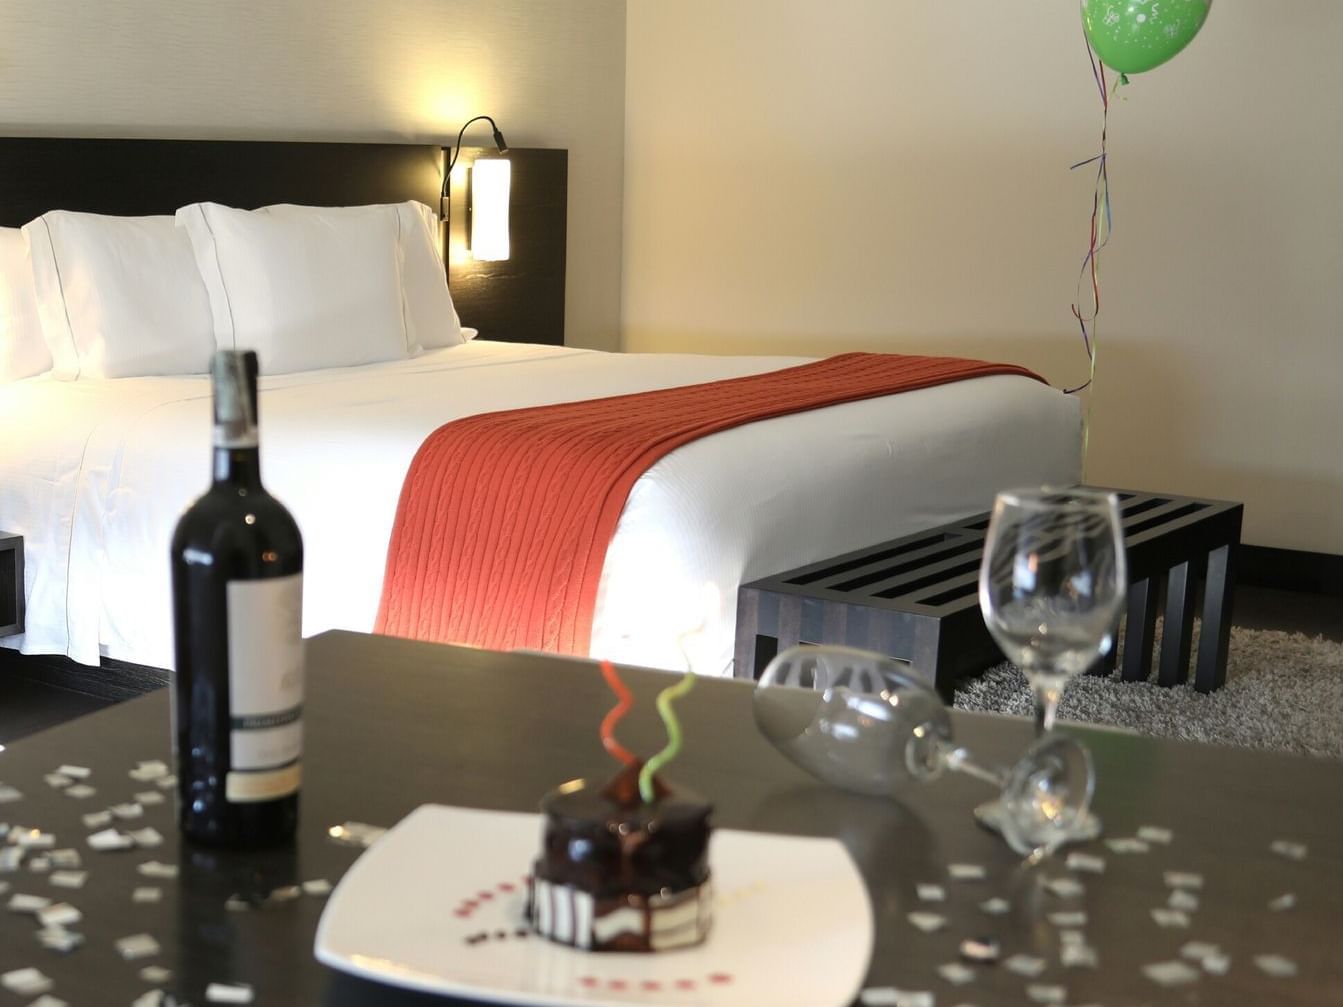 birthday celebration with cake and wine in room